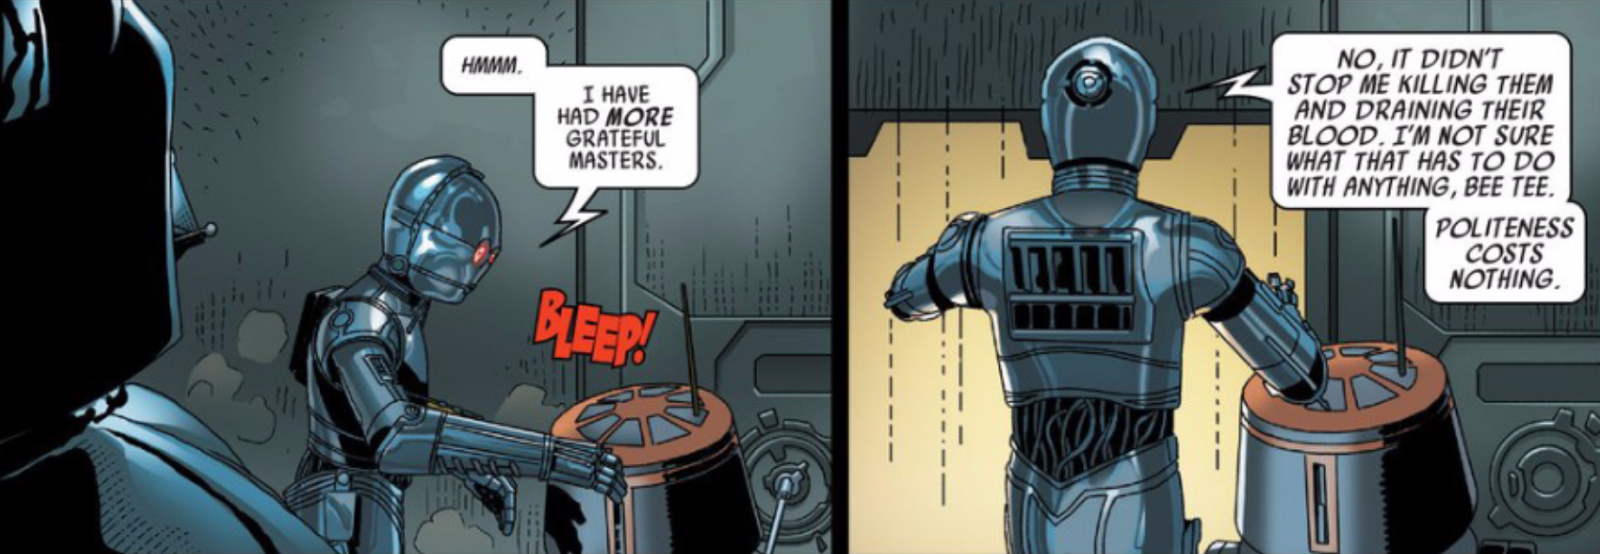 Darth Vader’s Got A Mystery Enemy In The Latest Star Wars Comic